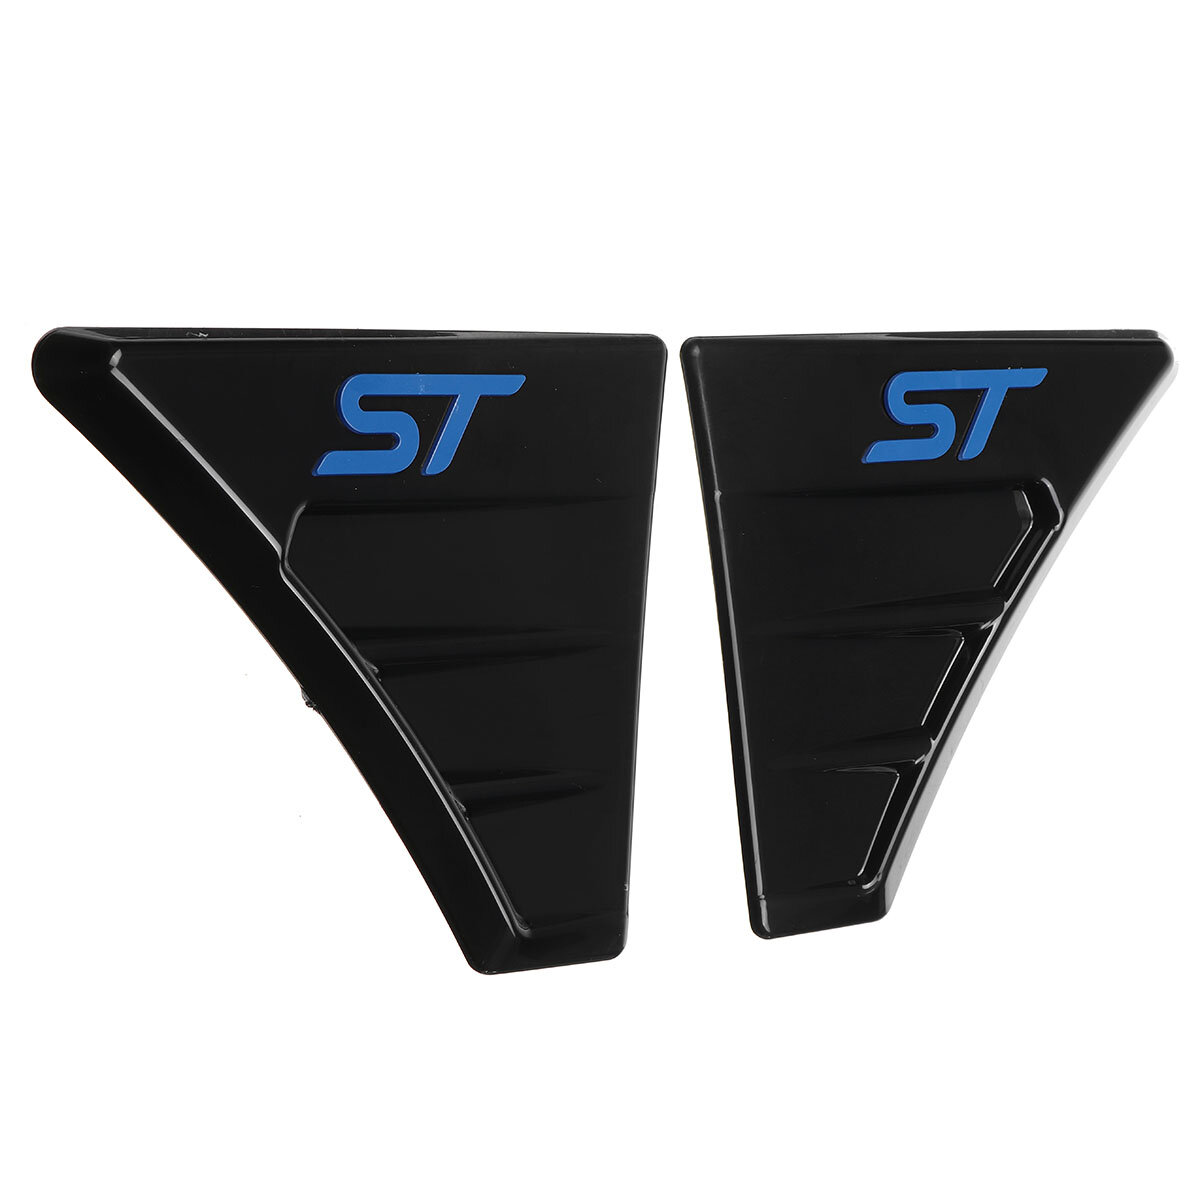 

FOR FORD FOCUS MK2 MK3 FIESTA ST Style ZETEC WING VENTS ABS - BLUE LOGO UK